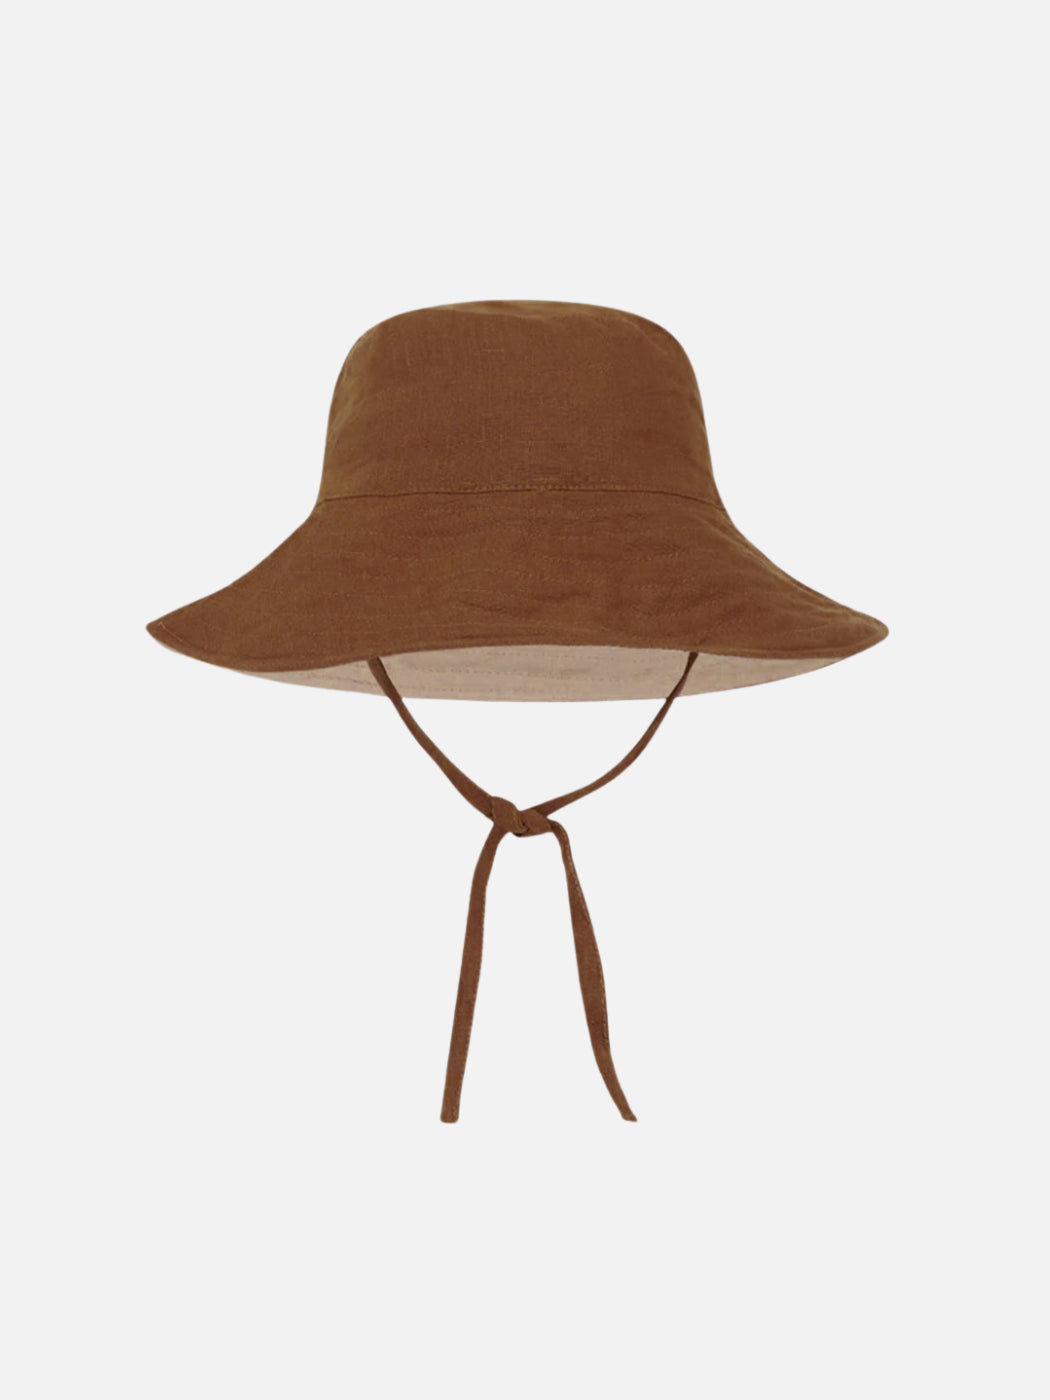 Summer and Storm brown linen sunhat with a wire rim and ties under the chin